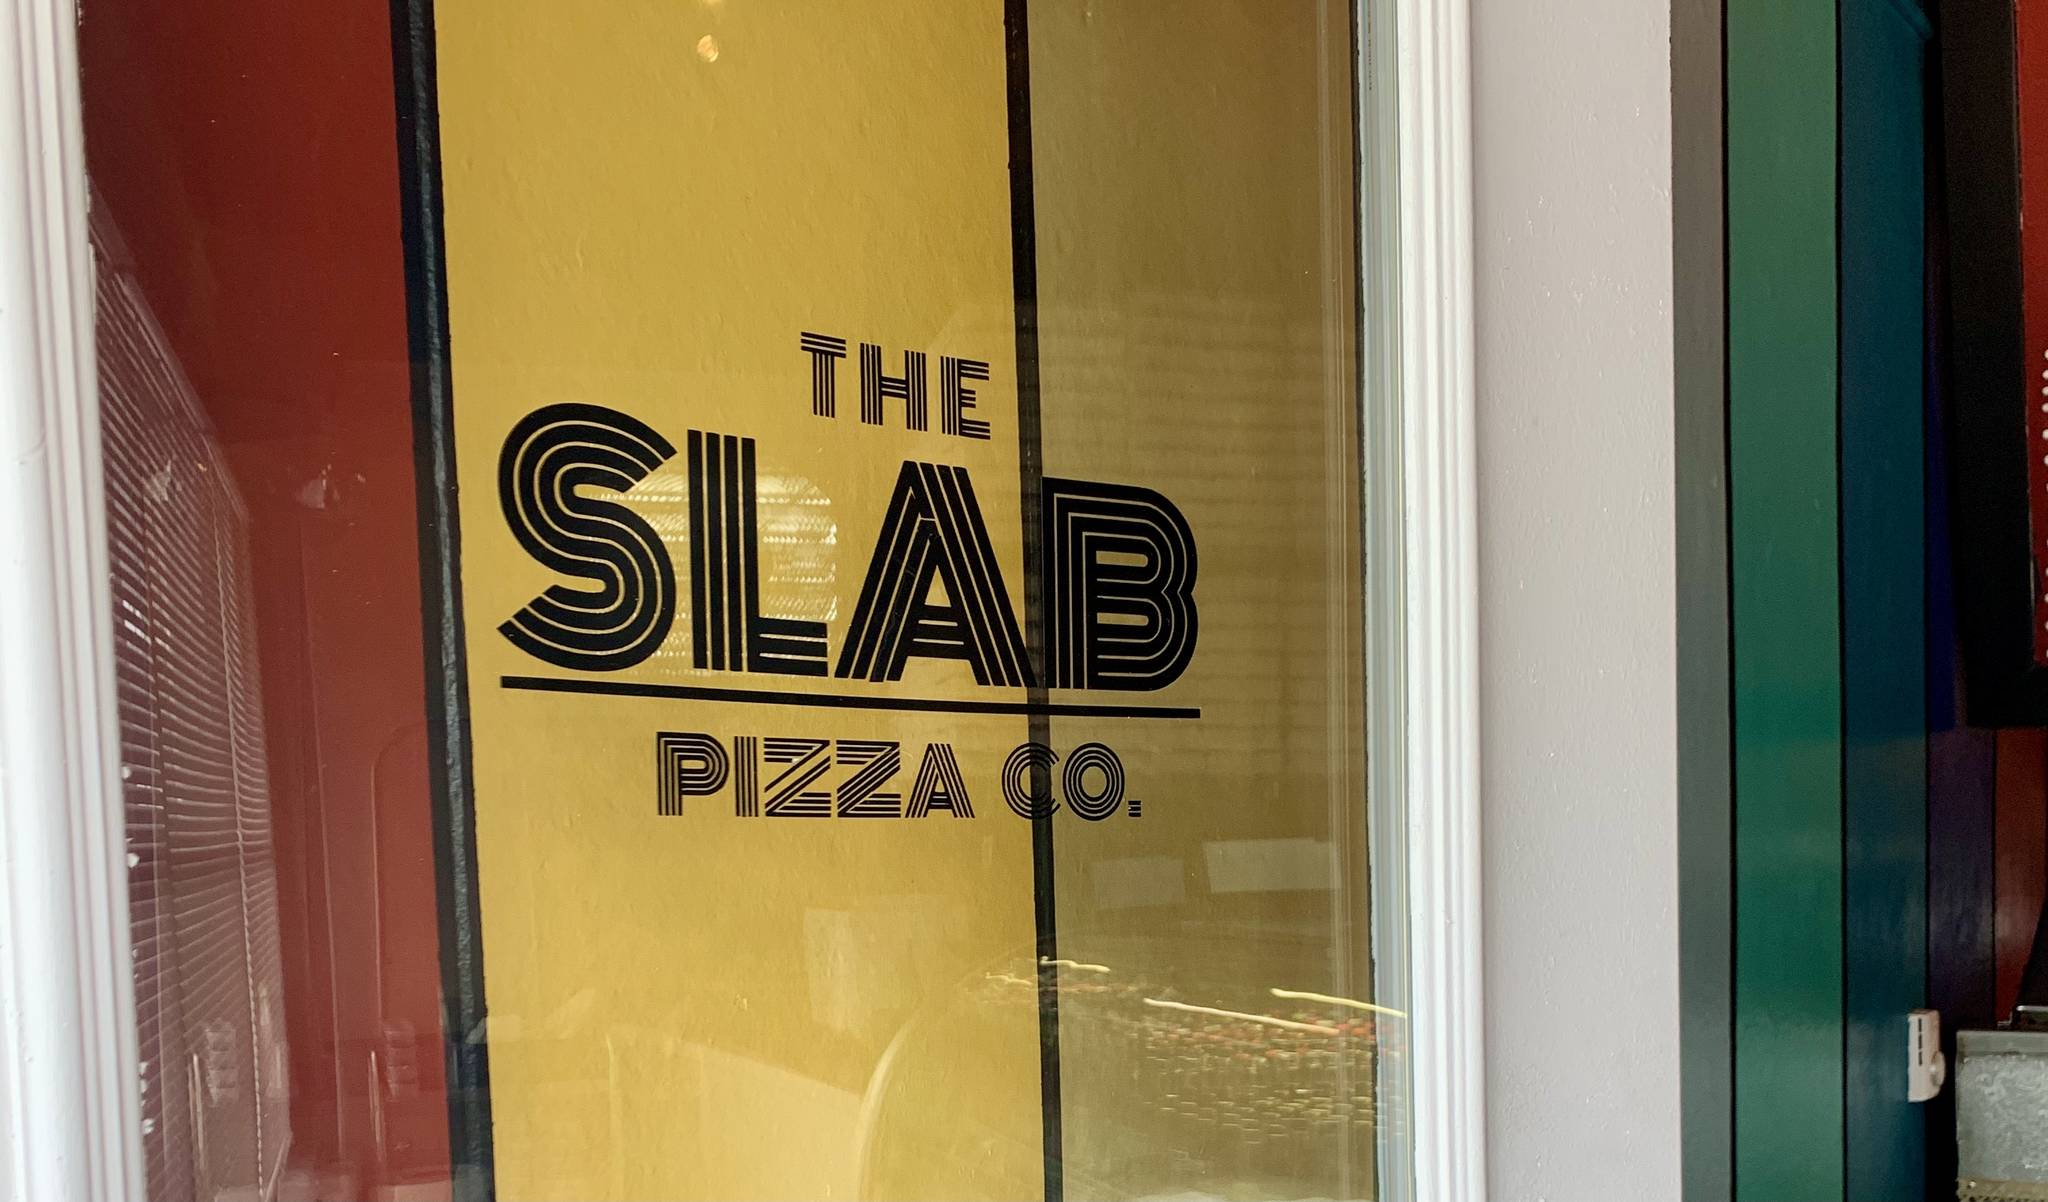 The Slab,a name for the old basketball courts in Suquamish, now the name of a pizzeria. (courtesy photo)